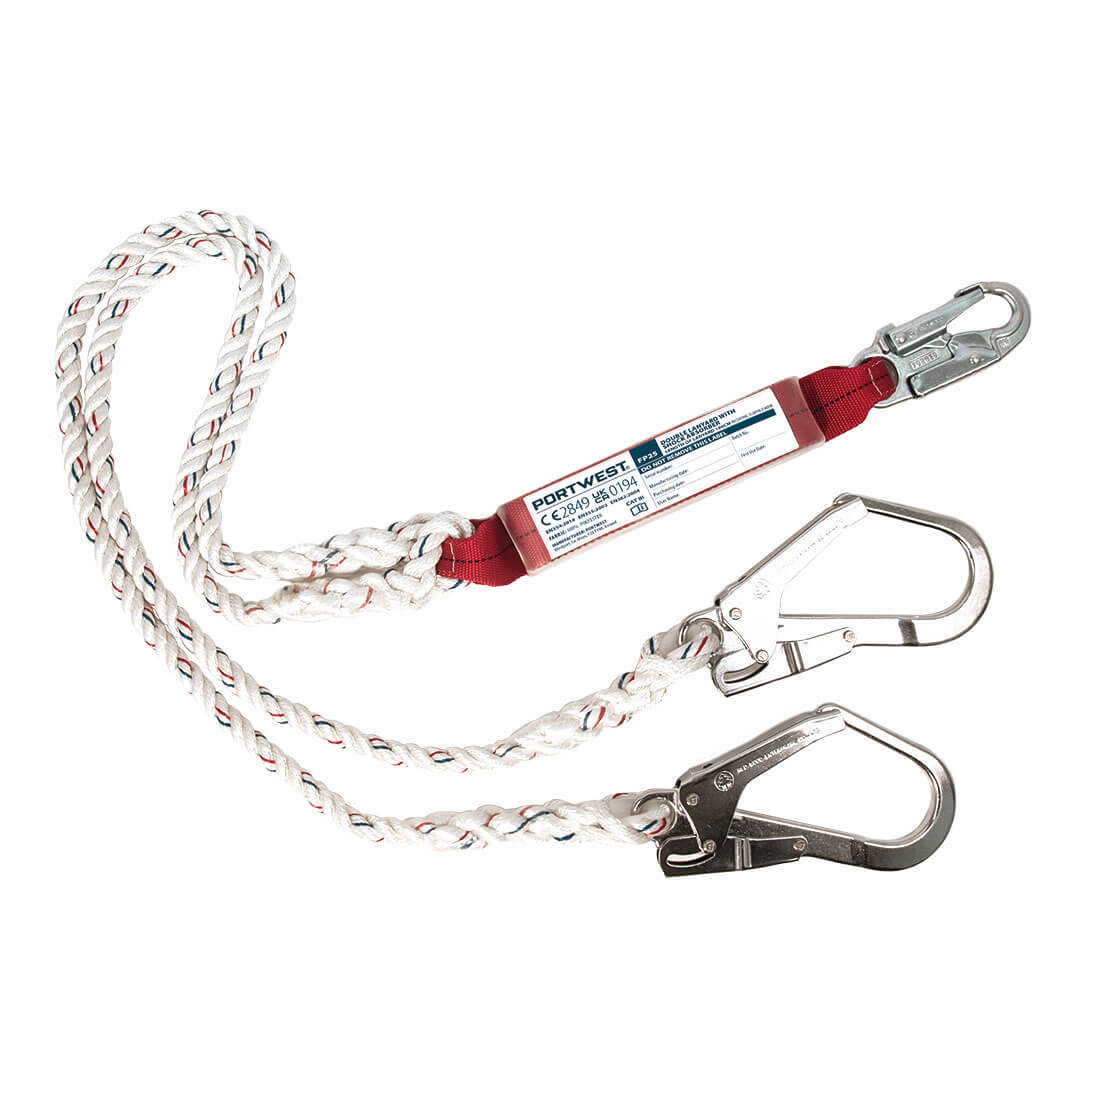 Double 1.8m Lanyard With Shock Absorber - White